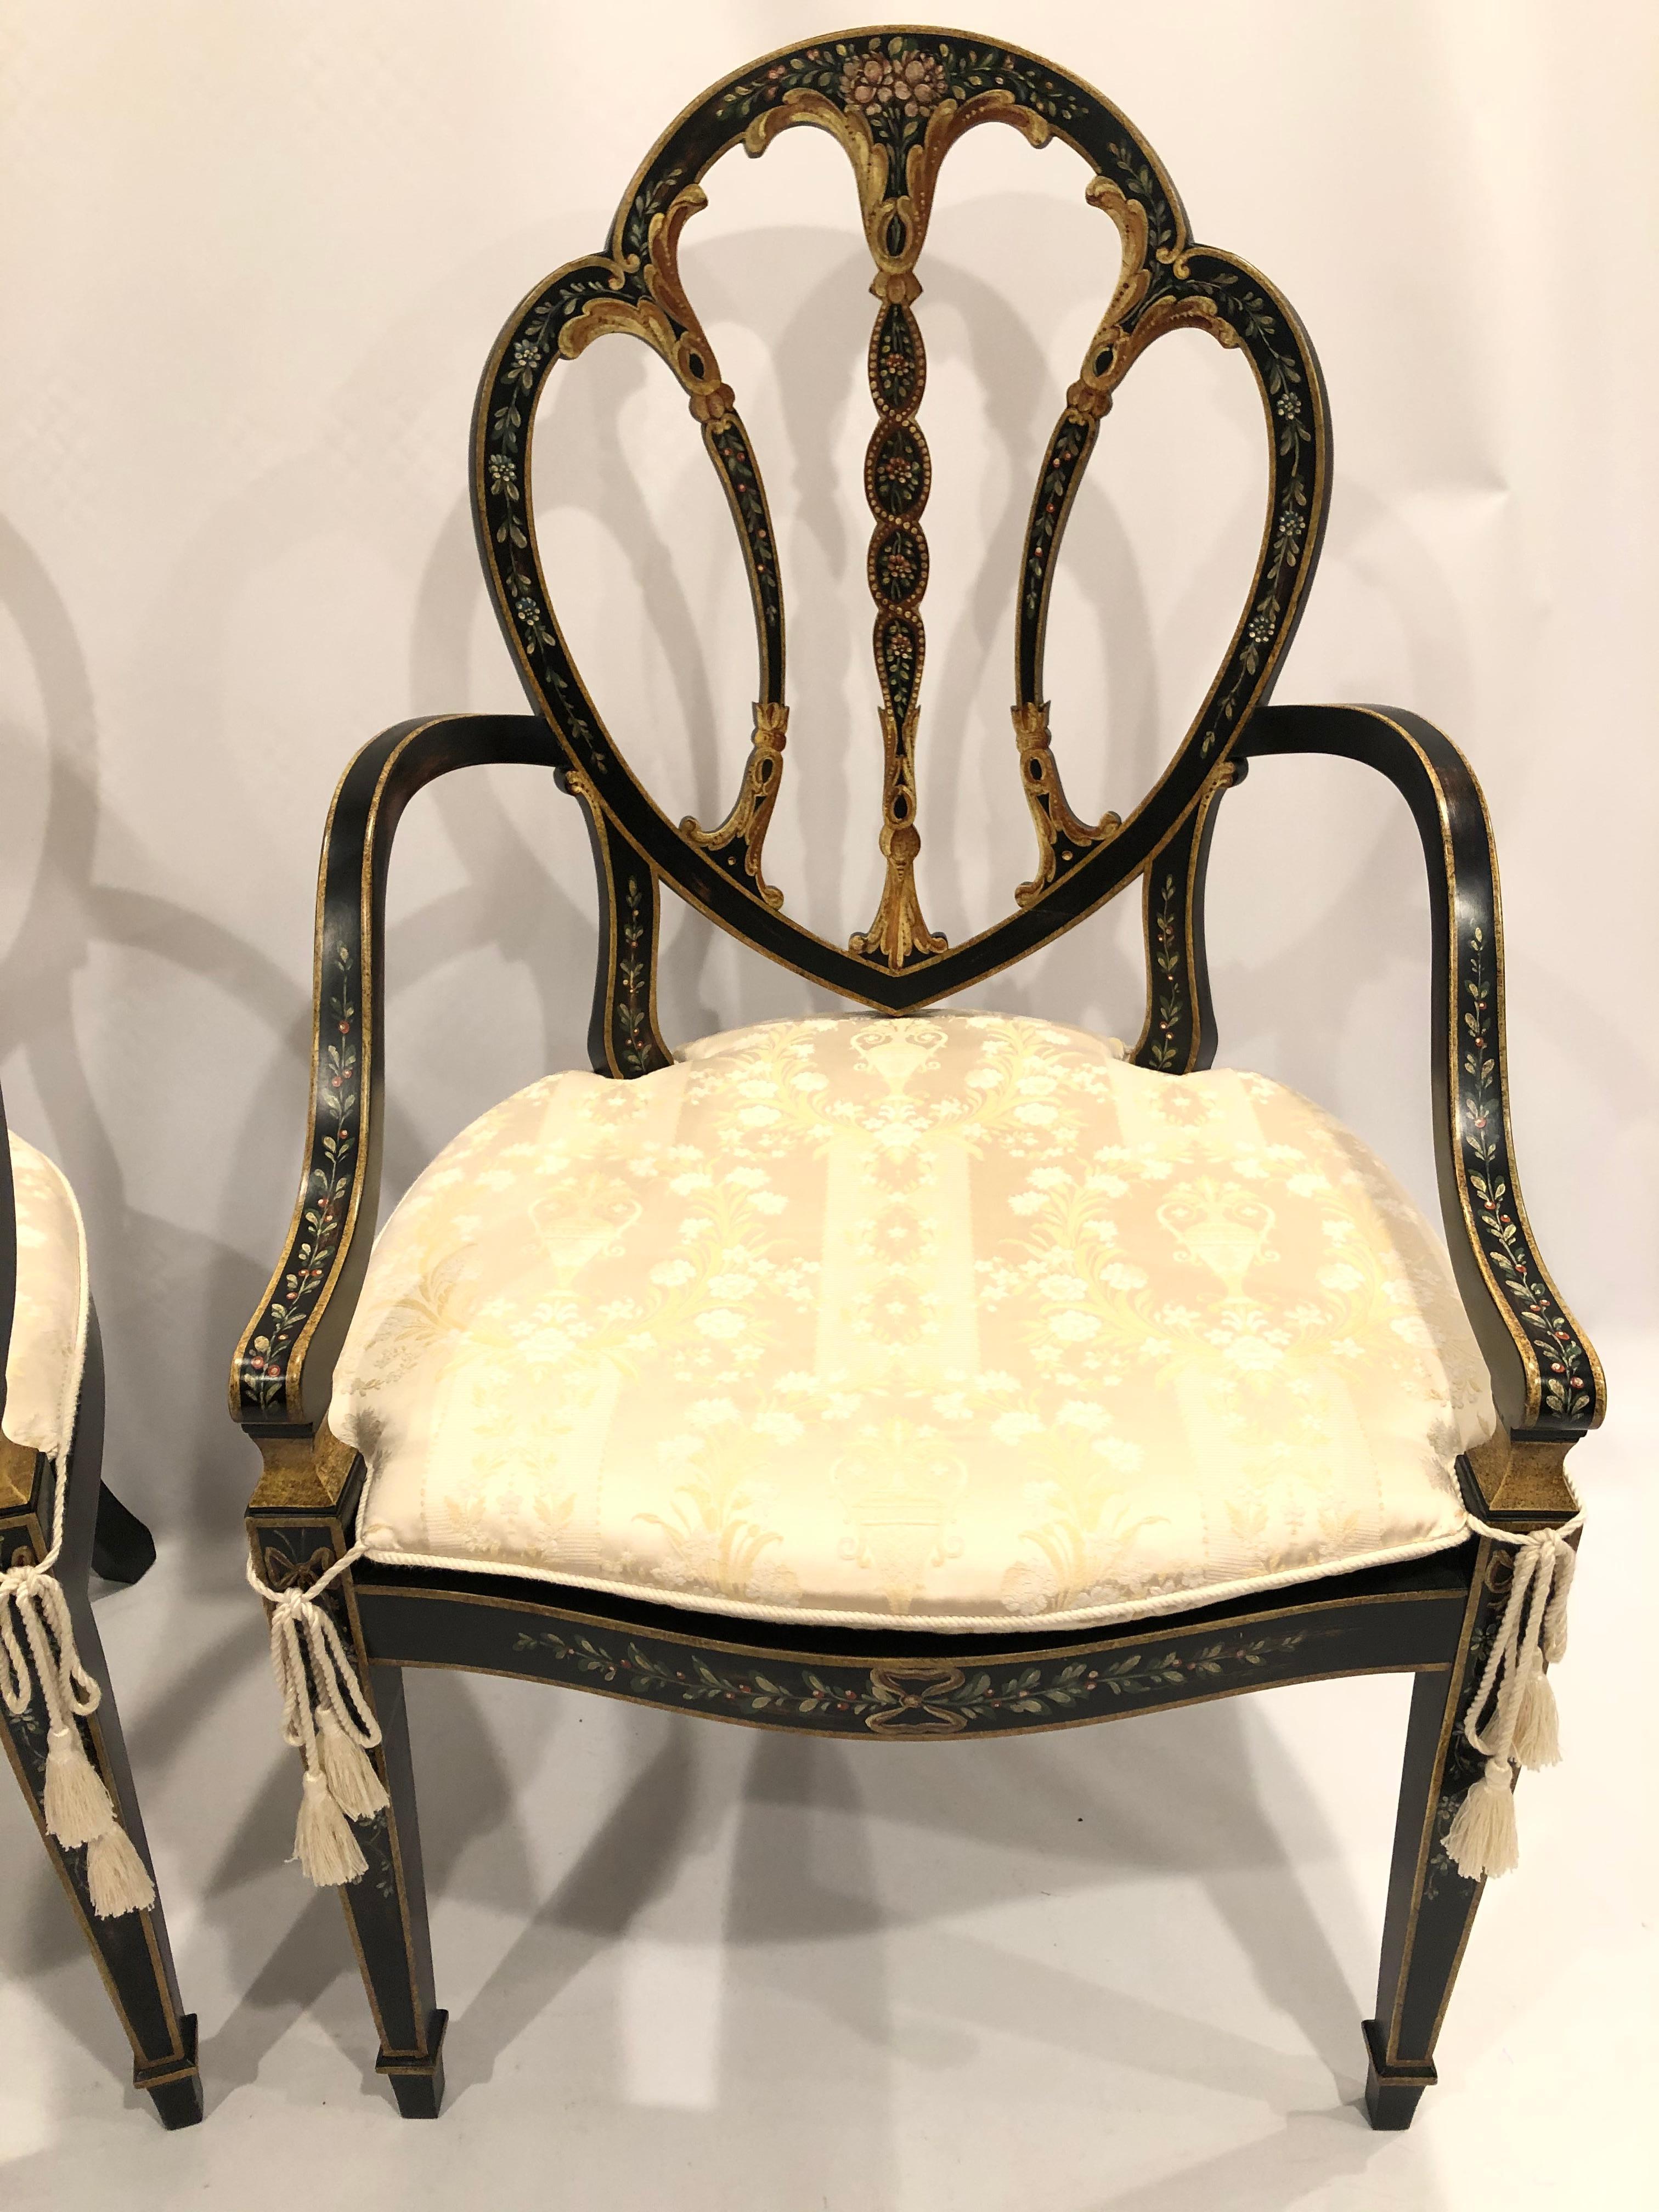 Superb pair of black painted shield back armchairs having lovely floral decoration caned seats and custom off white damask seat cushions.